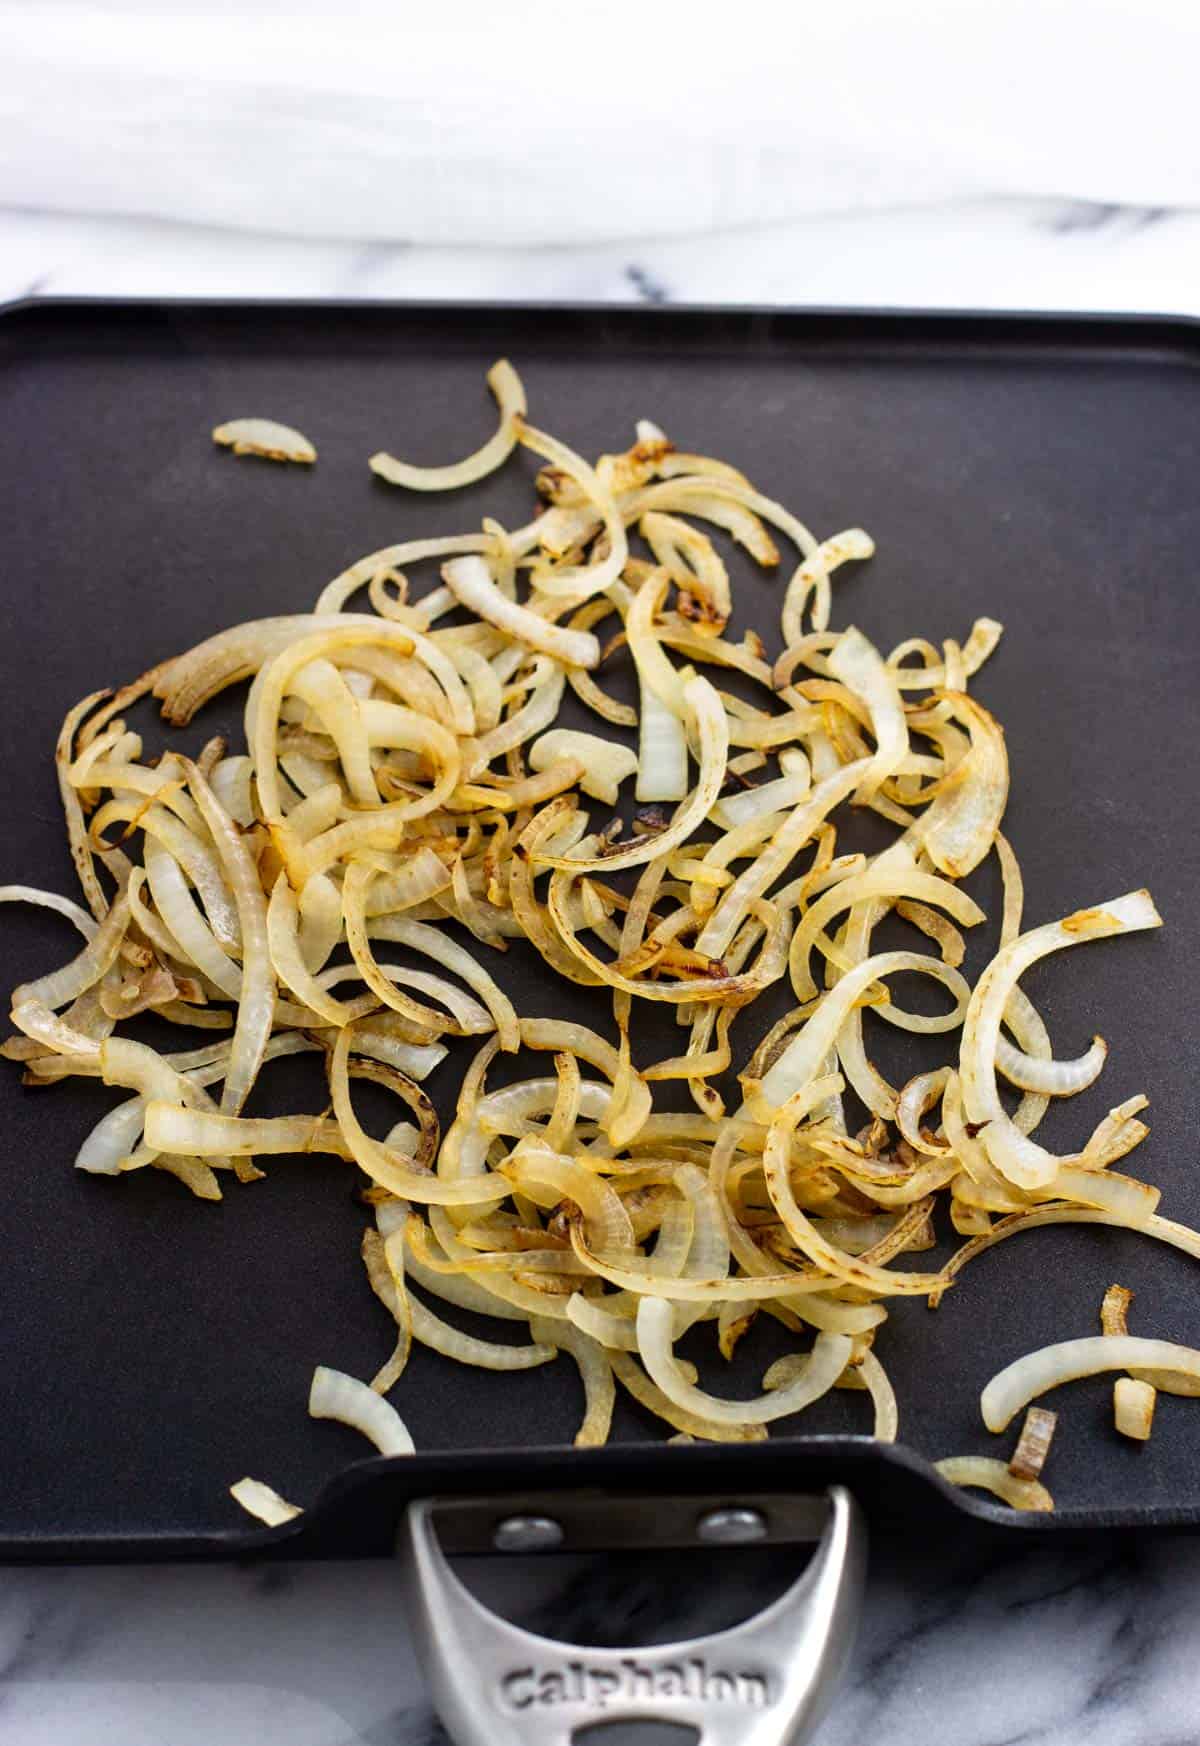 Sauted onions on a griddle pan.